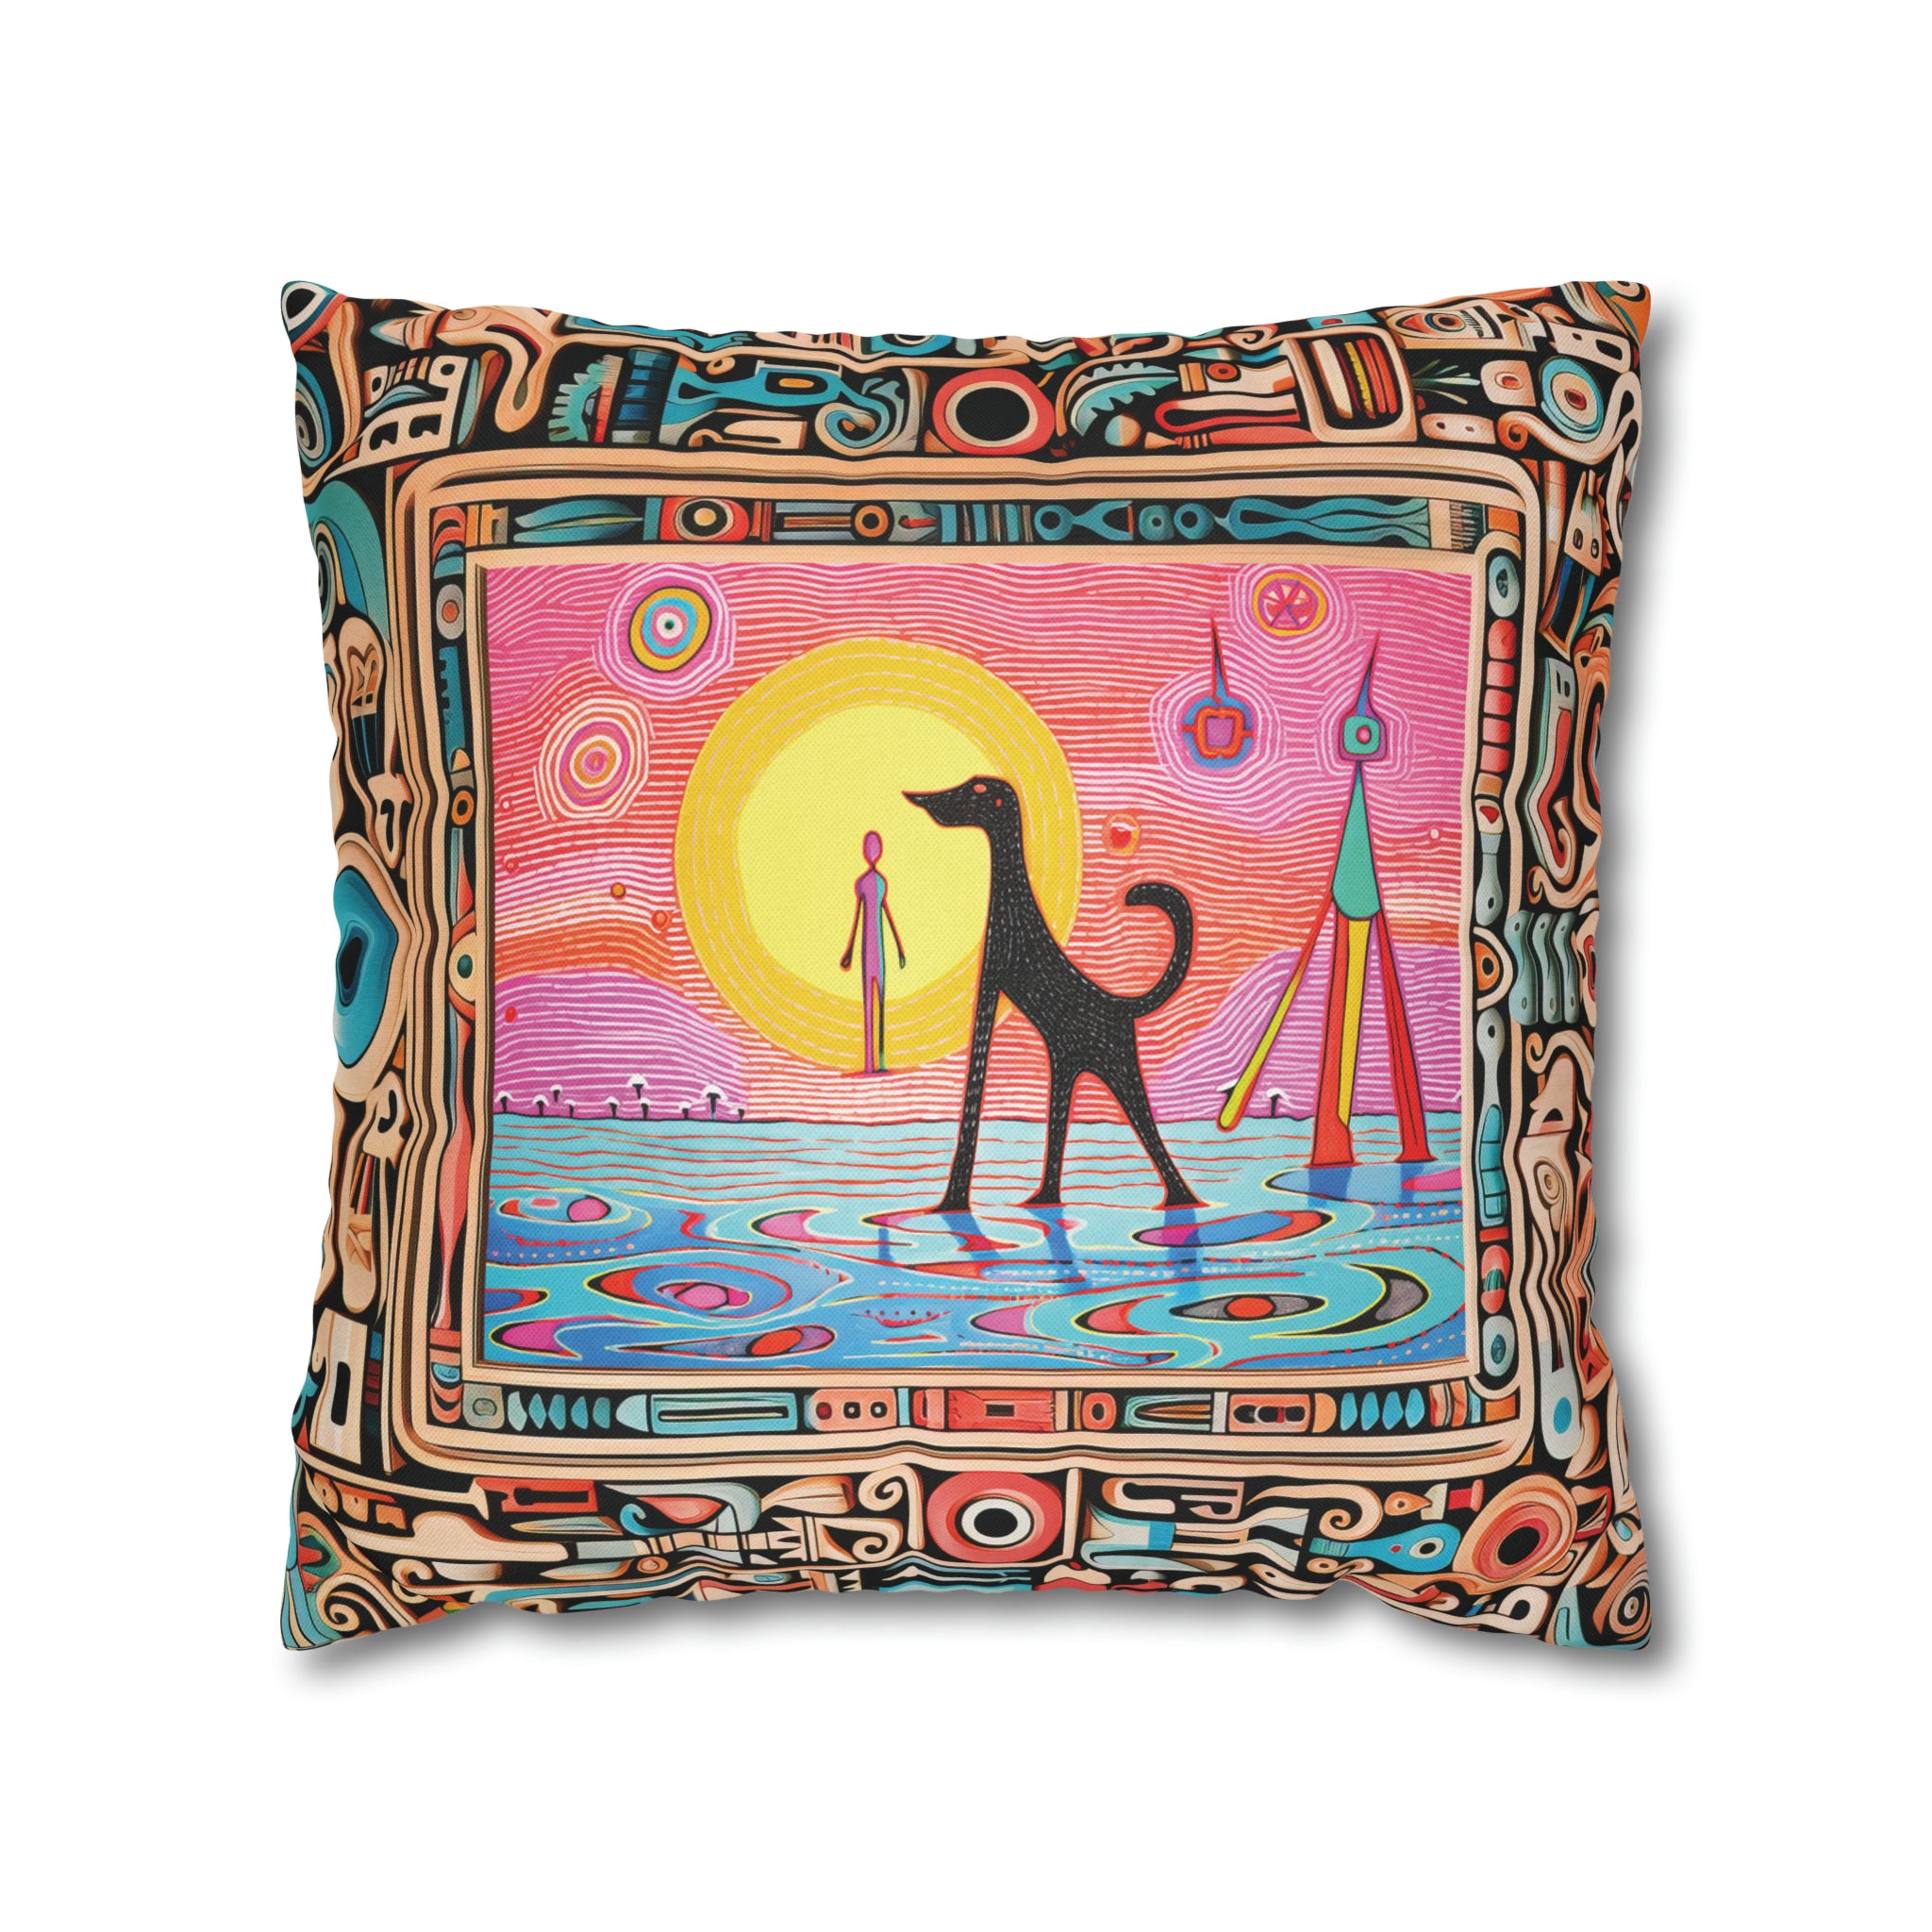 Square Pillow Case 18" x 18", CASE ONLY, no pillow form, original Pop Art Style, Alien Dog Taking a Swim, Image in a frame